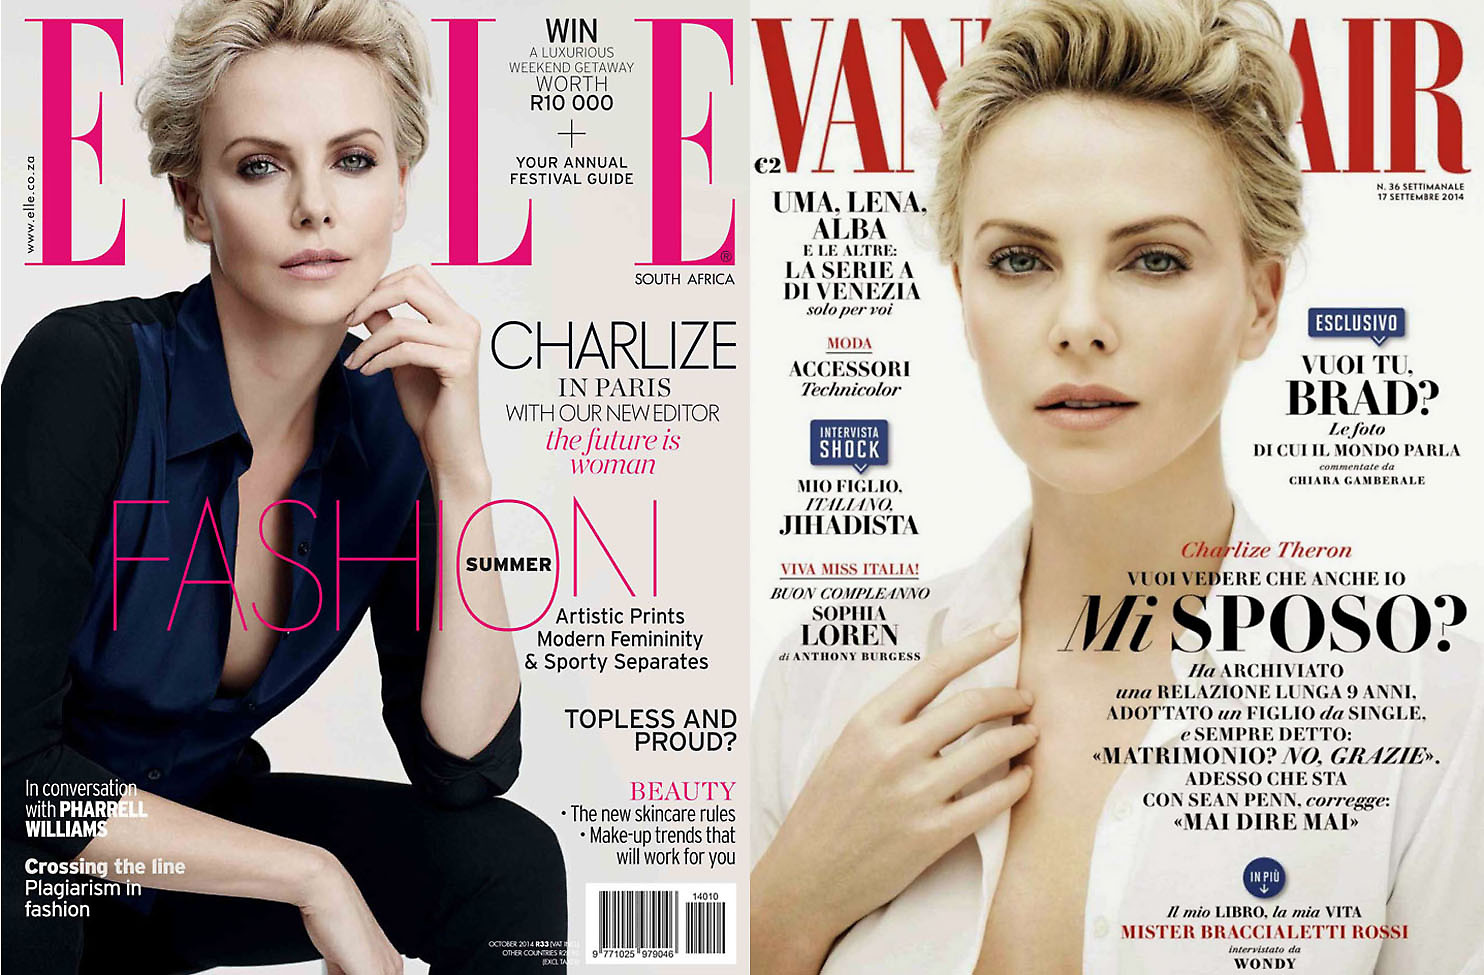 Charlize double cover-1.jpg 1510 975 0 90 1 50 50